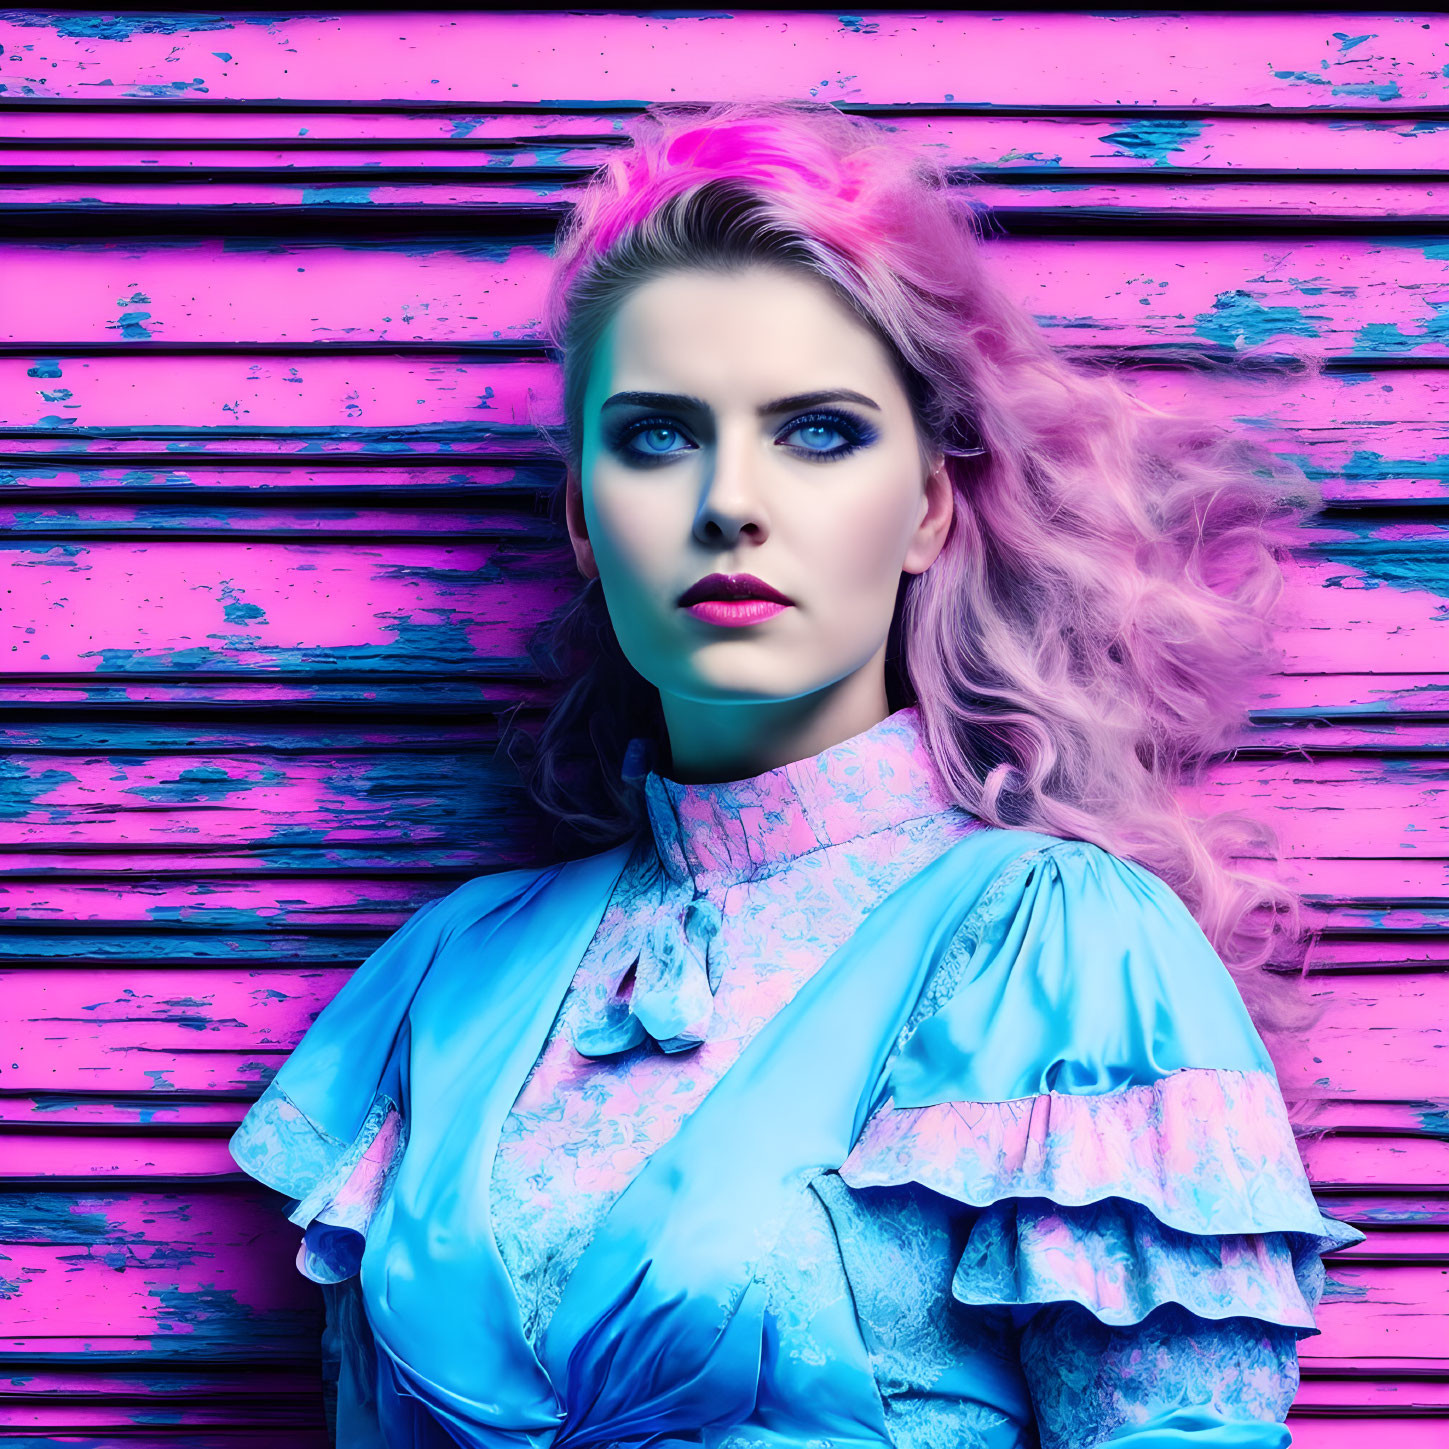 Vibrant pink background with woman in blue ruffled blouse and pink hair